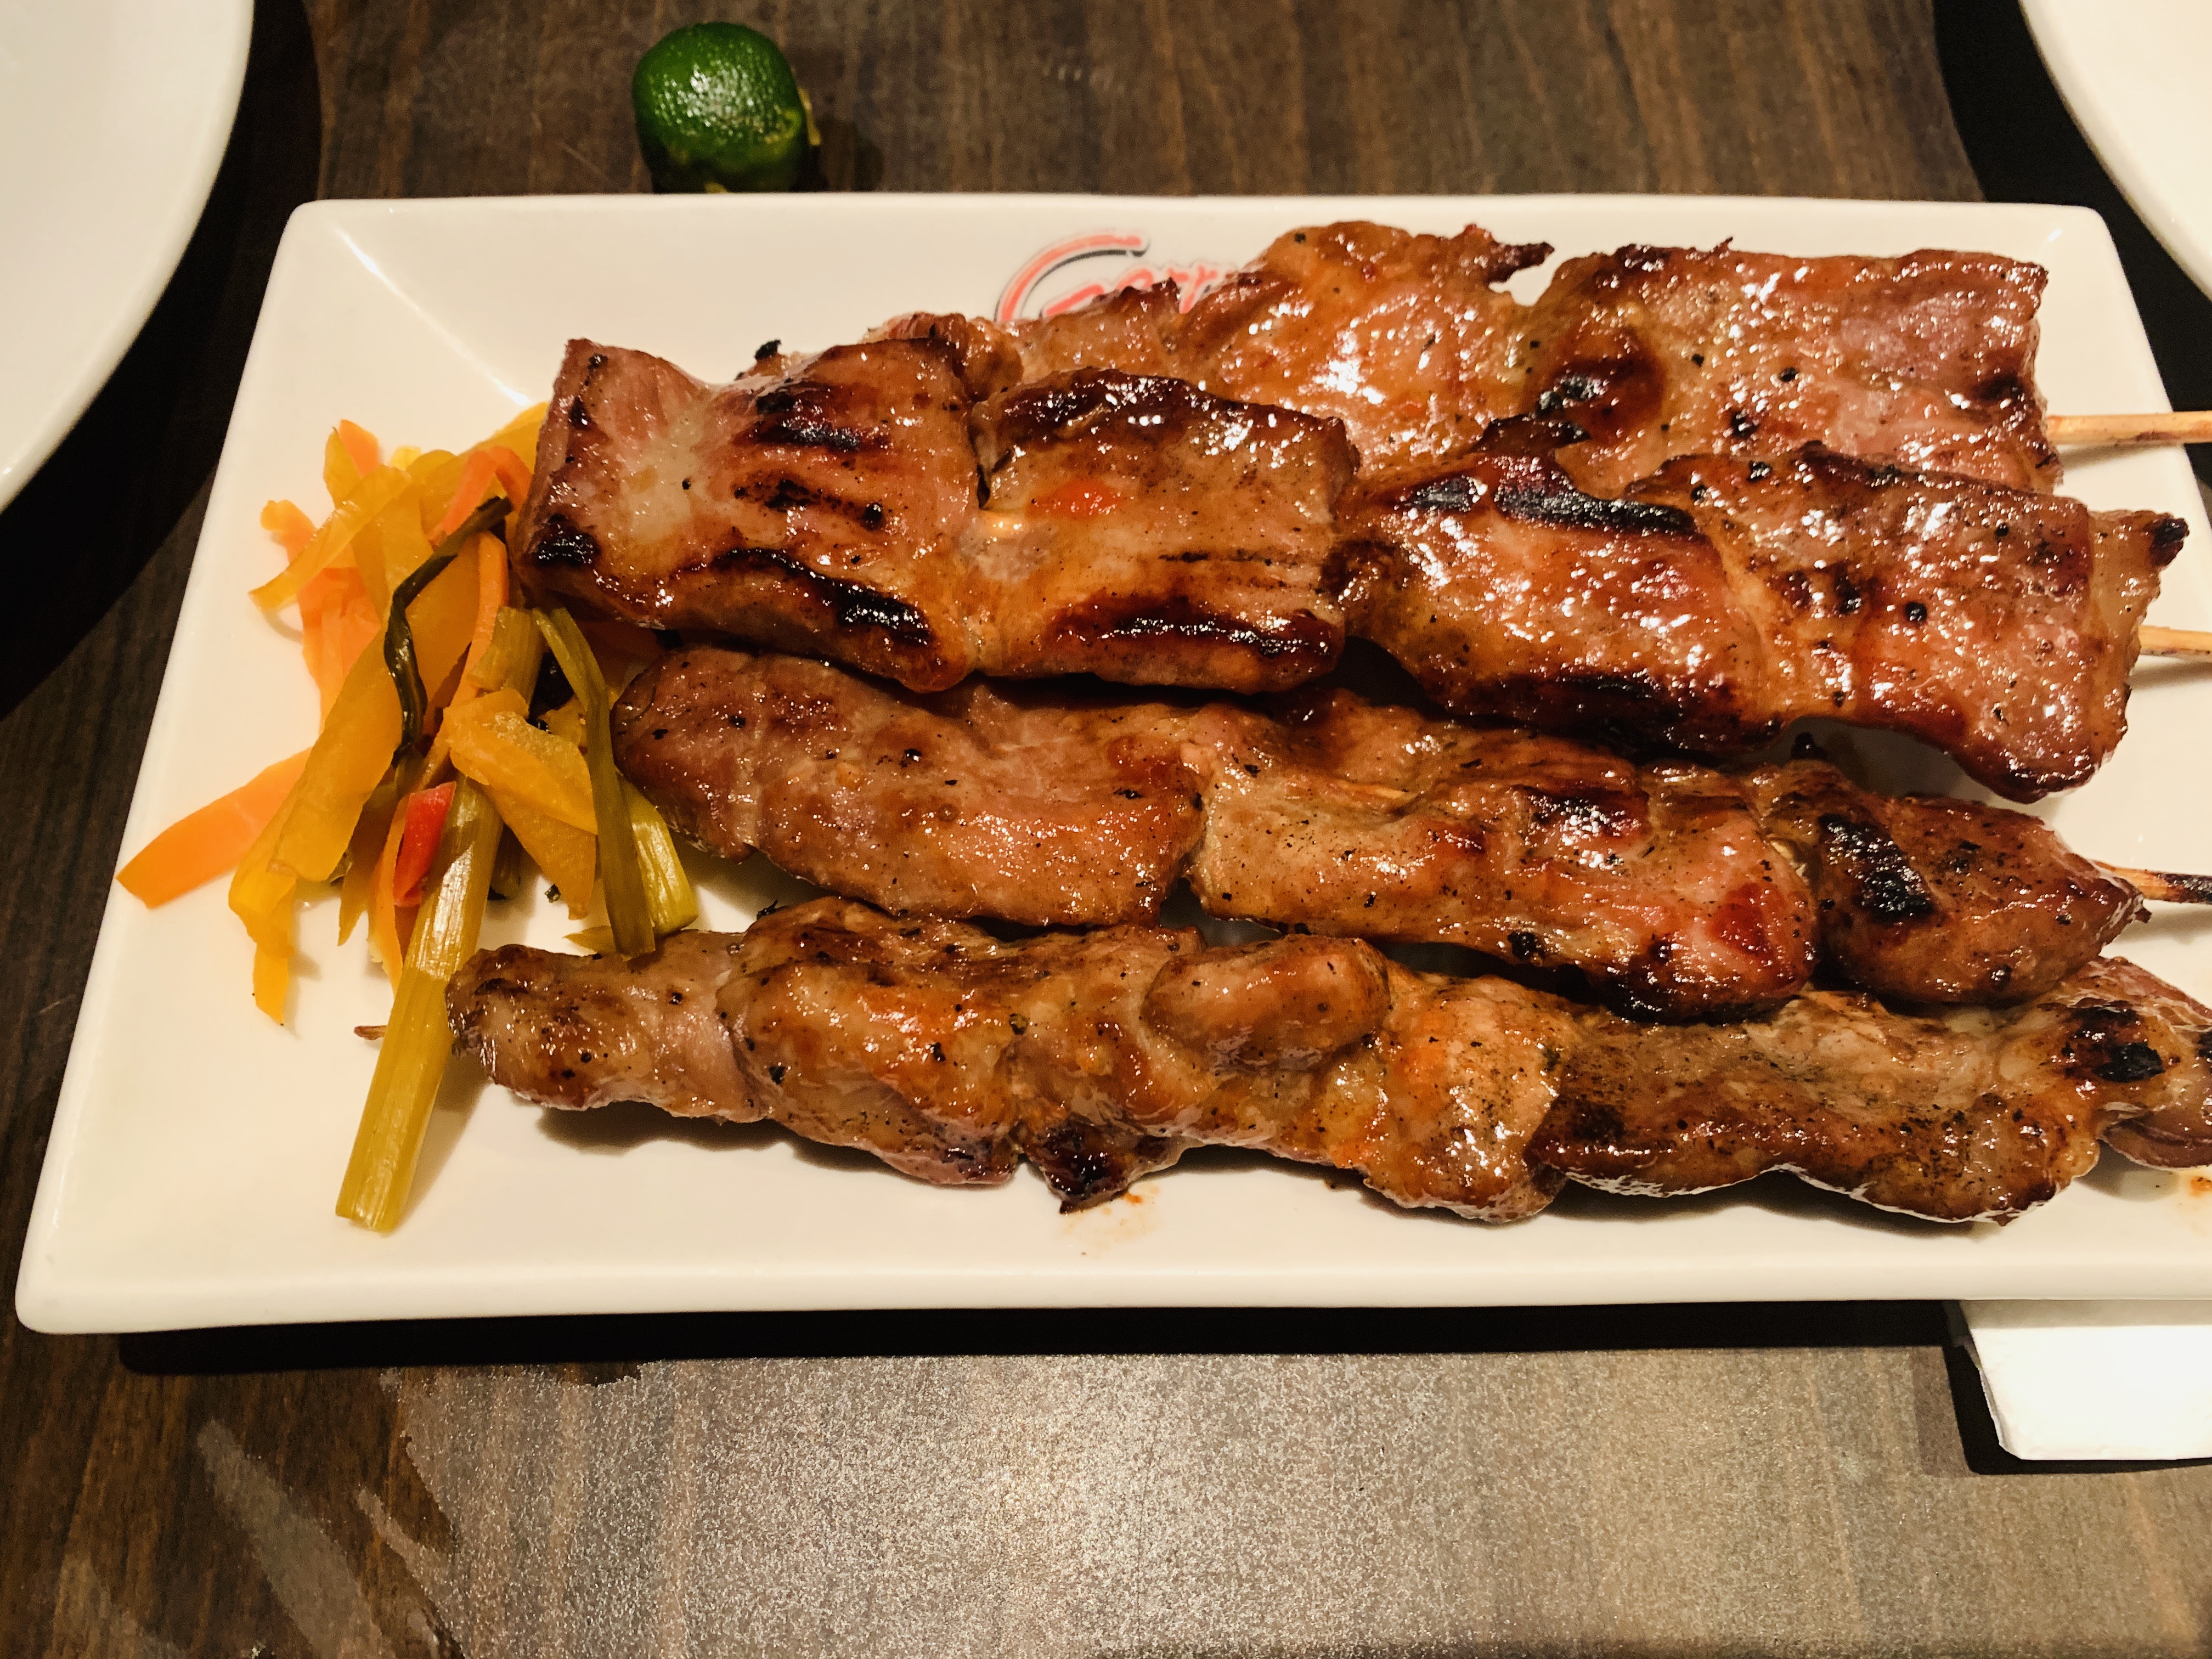 Gerrys Grill - Pork Barbecue